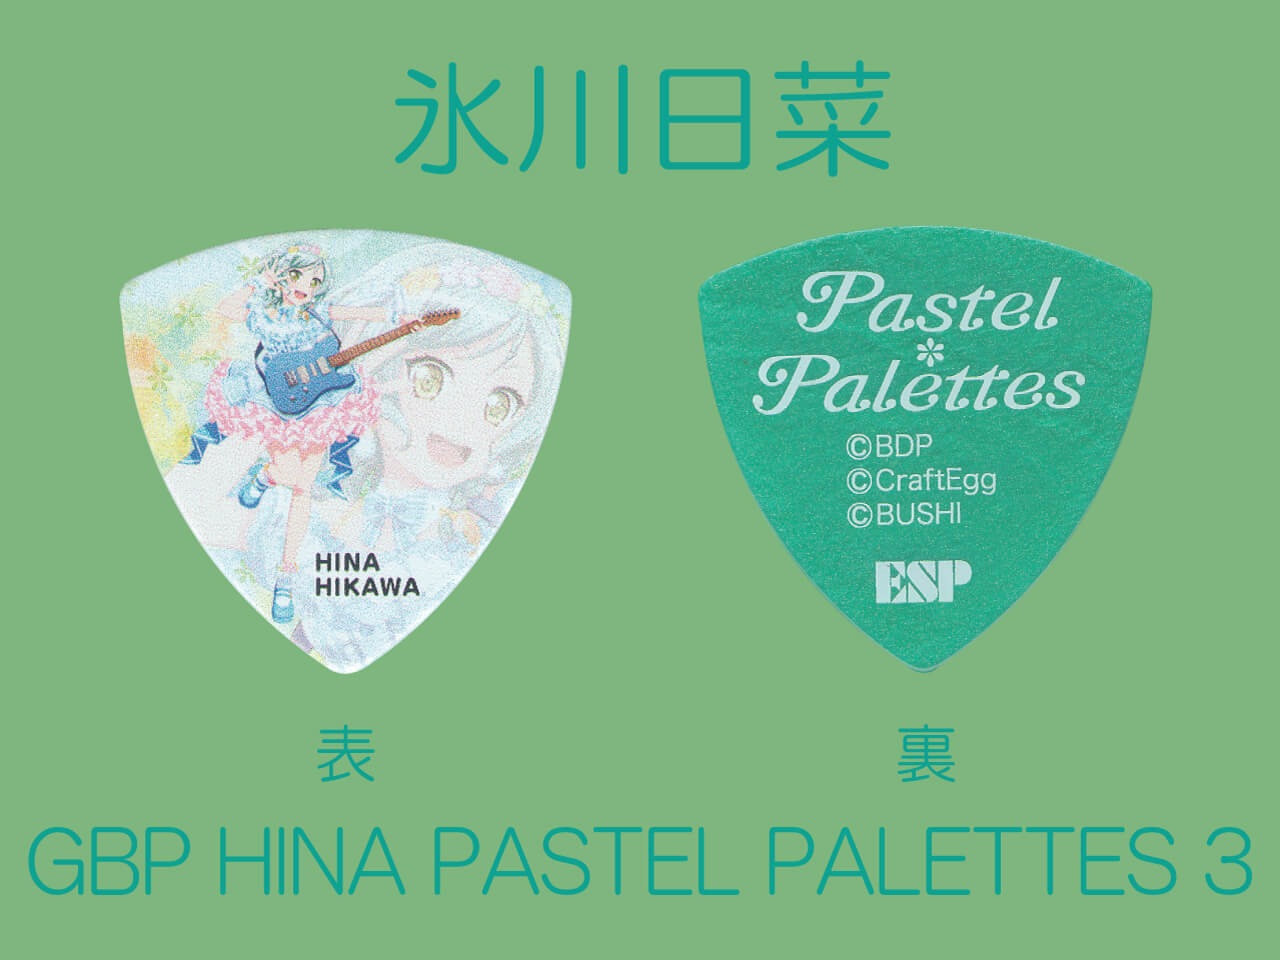 【ESP×BanG Dream!コラボピック】Pastel*Palettes Character Pick Ver.3 "氷川日菜"（GBP HINA PASTEL PALETTES 3）＆”ハメパチ” セット